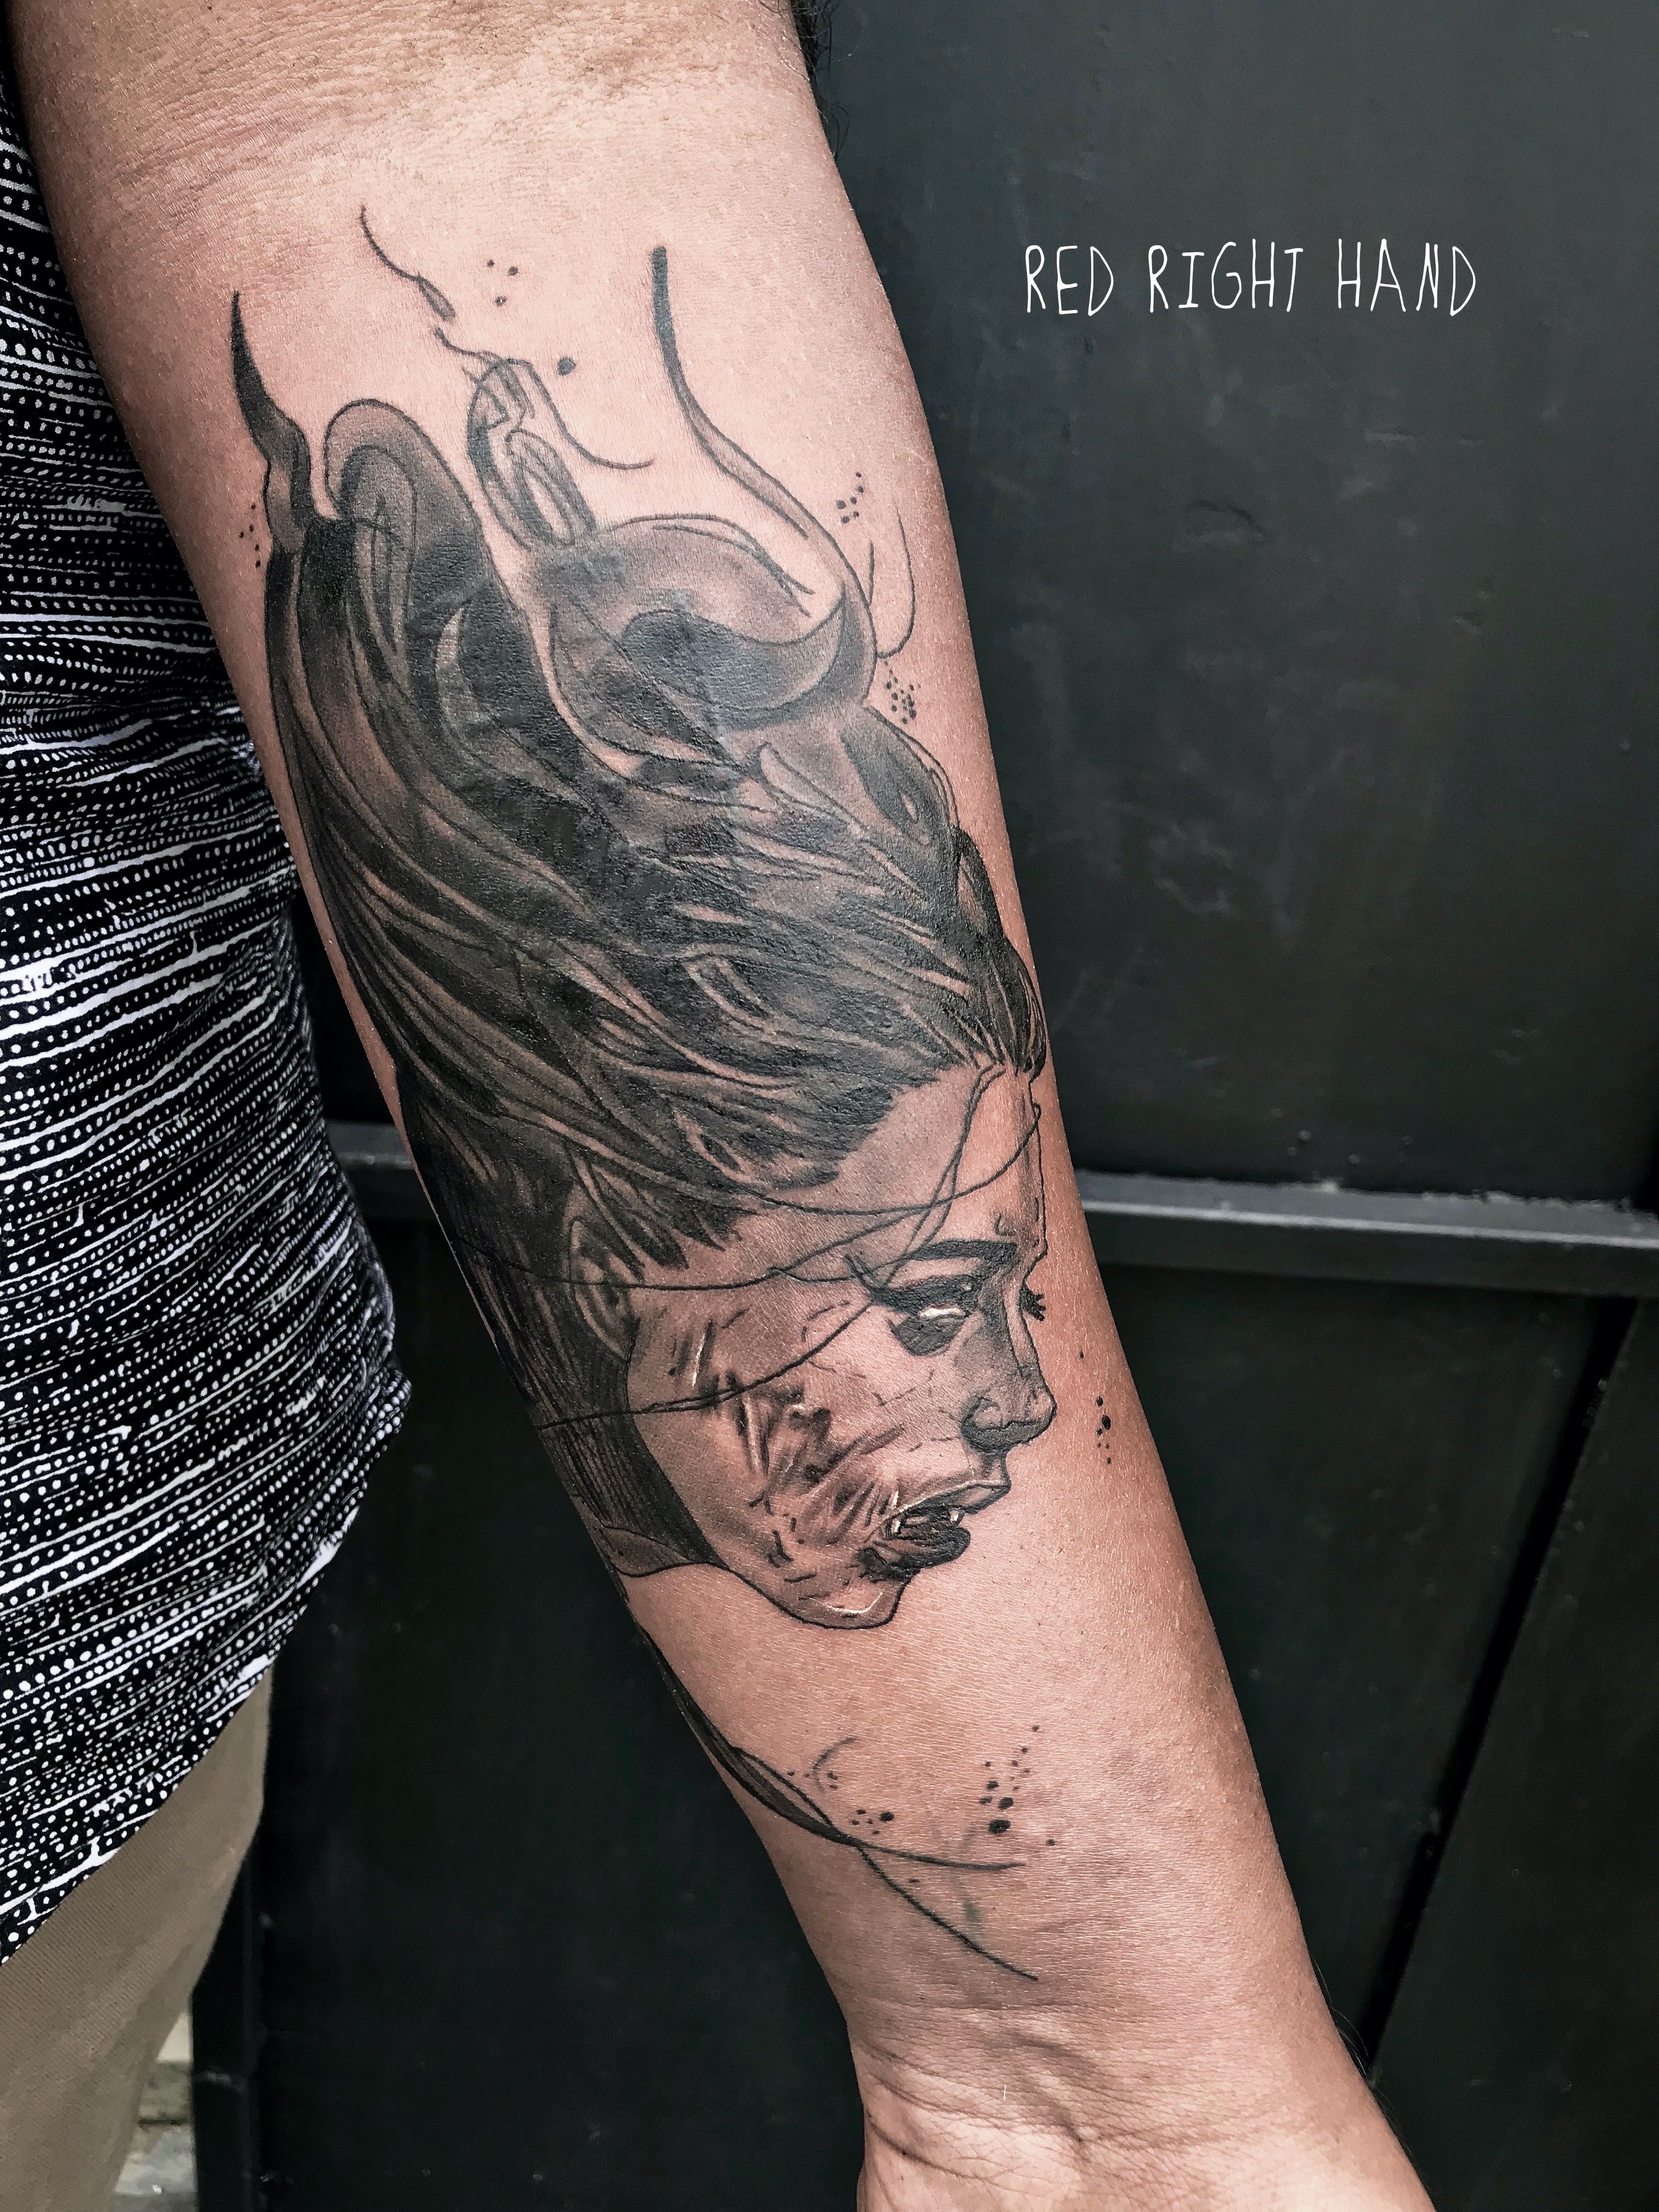 The Right Hand Tattoo Co  Healed lion leg piece by Raúl on  jgbuildingprojects All enquiries  07 5648 0626 or DM  thelineandtheshade  currumbin currumbintattoo tattoo tattooartist  tattooed tattooing tat tats 